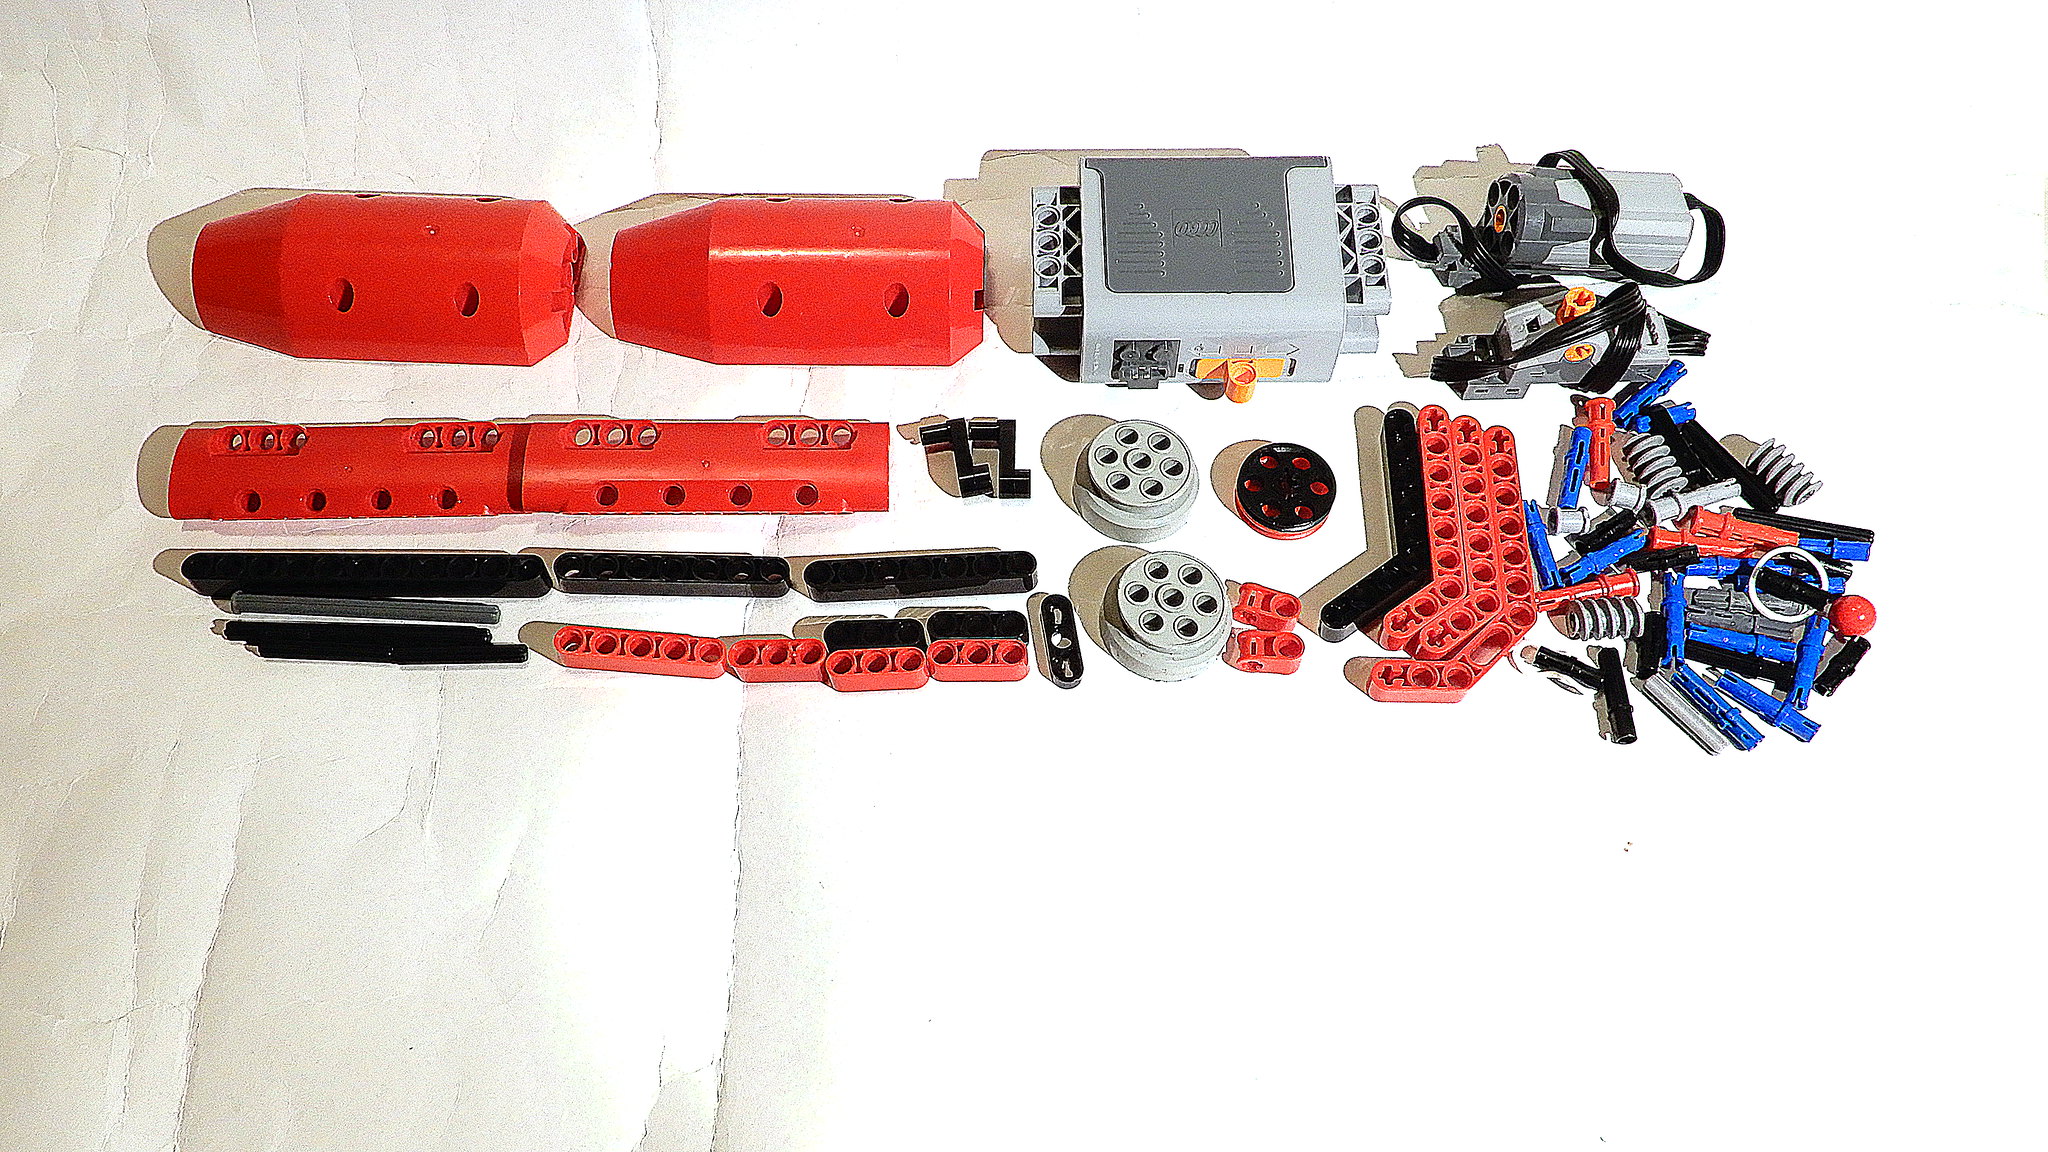 How to Build a Lego Technic Cordless Drill (with Power Functions Motor - 4K)